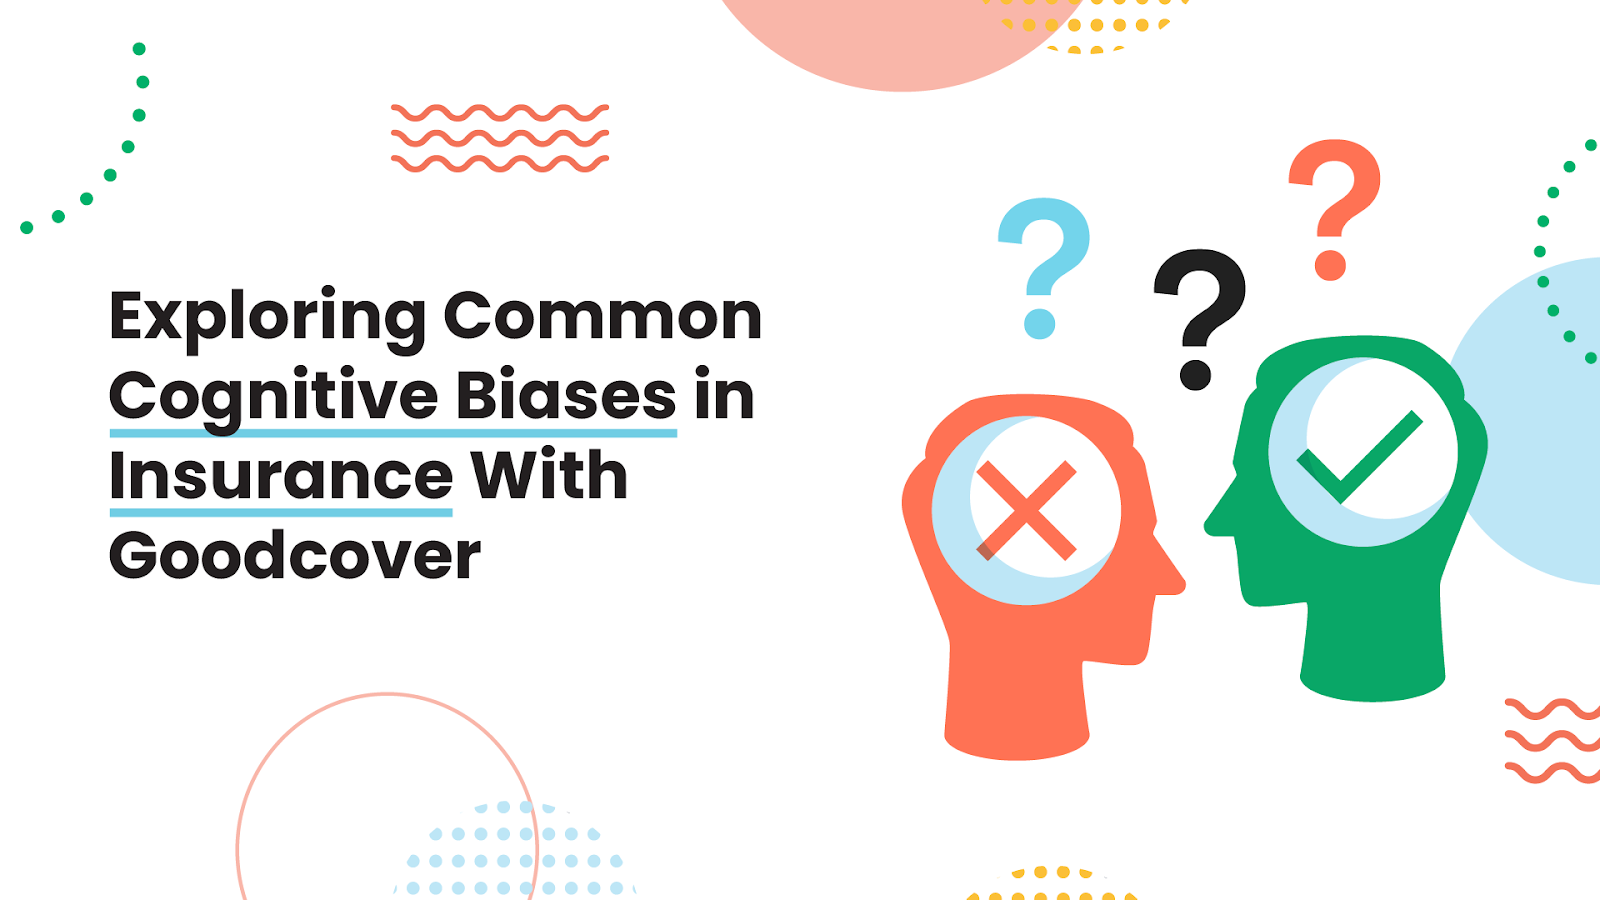 Exploring Common Cognitive Biases in Insurance With Goodcover